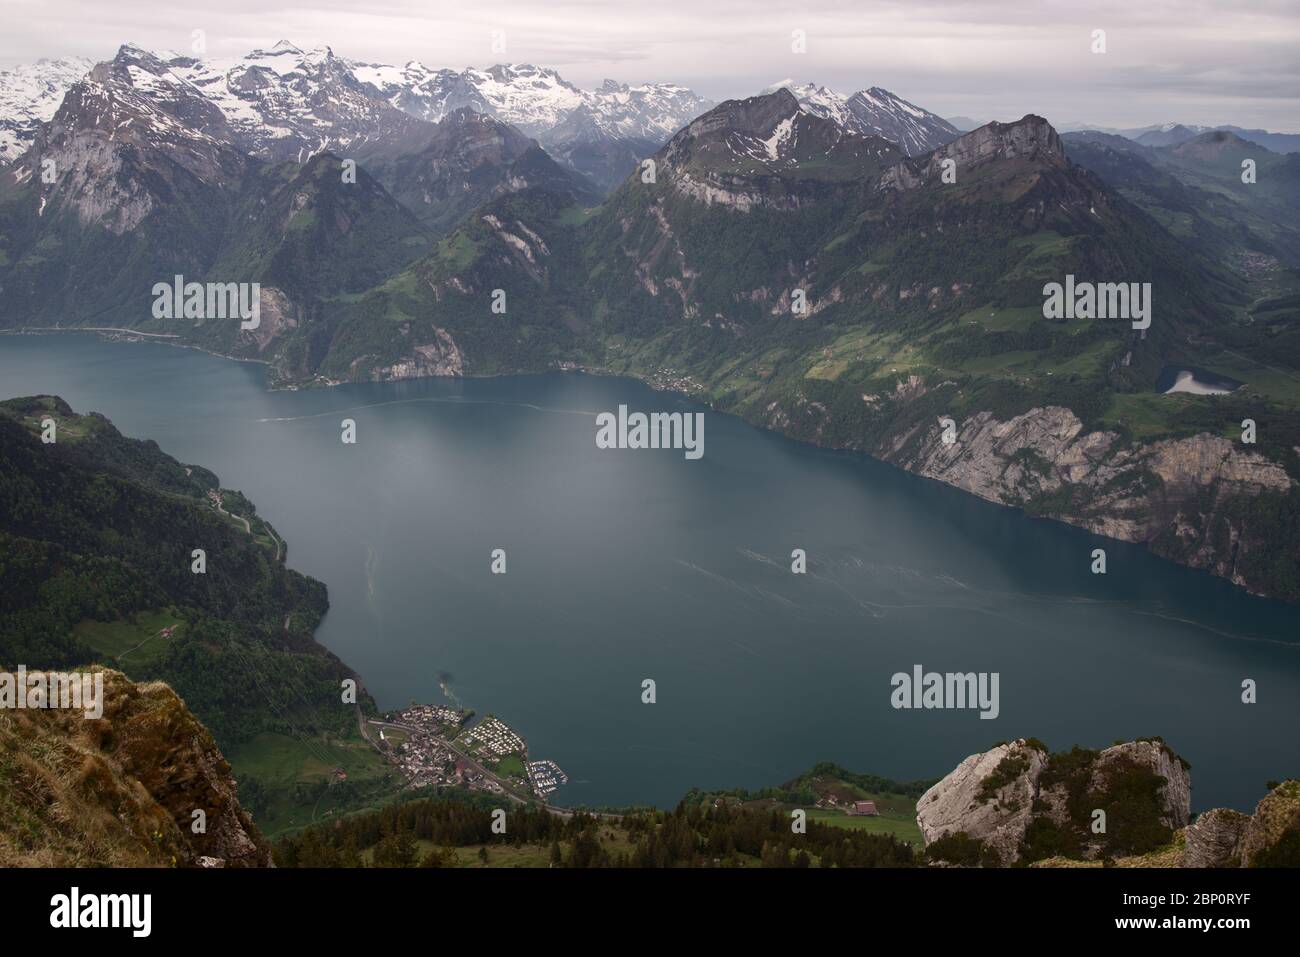 Panorama from Fronalpstock mountain peak overlooking Lake Lucerne and a typical swiss landscape with mountains and lakes. Stock Photo